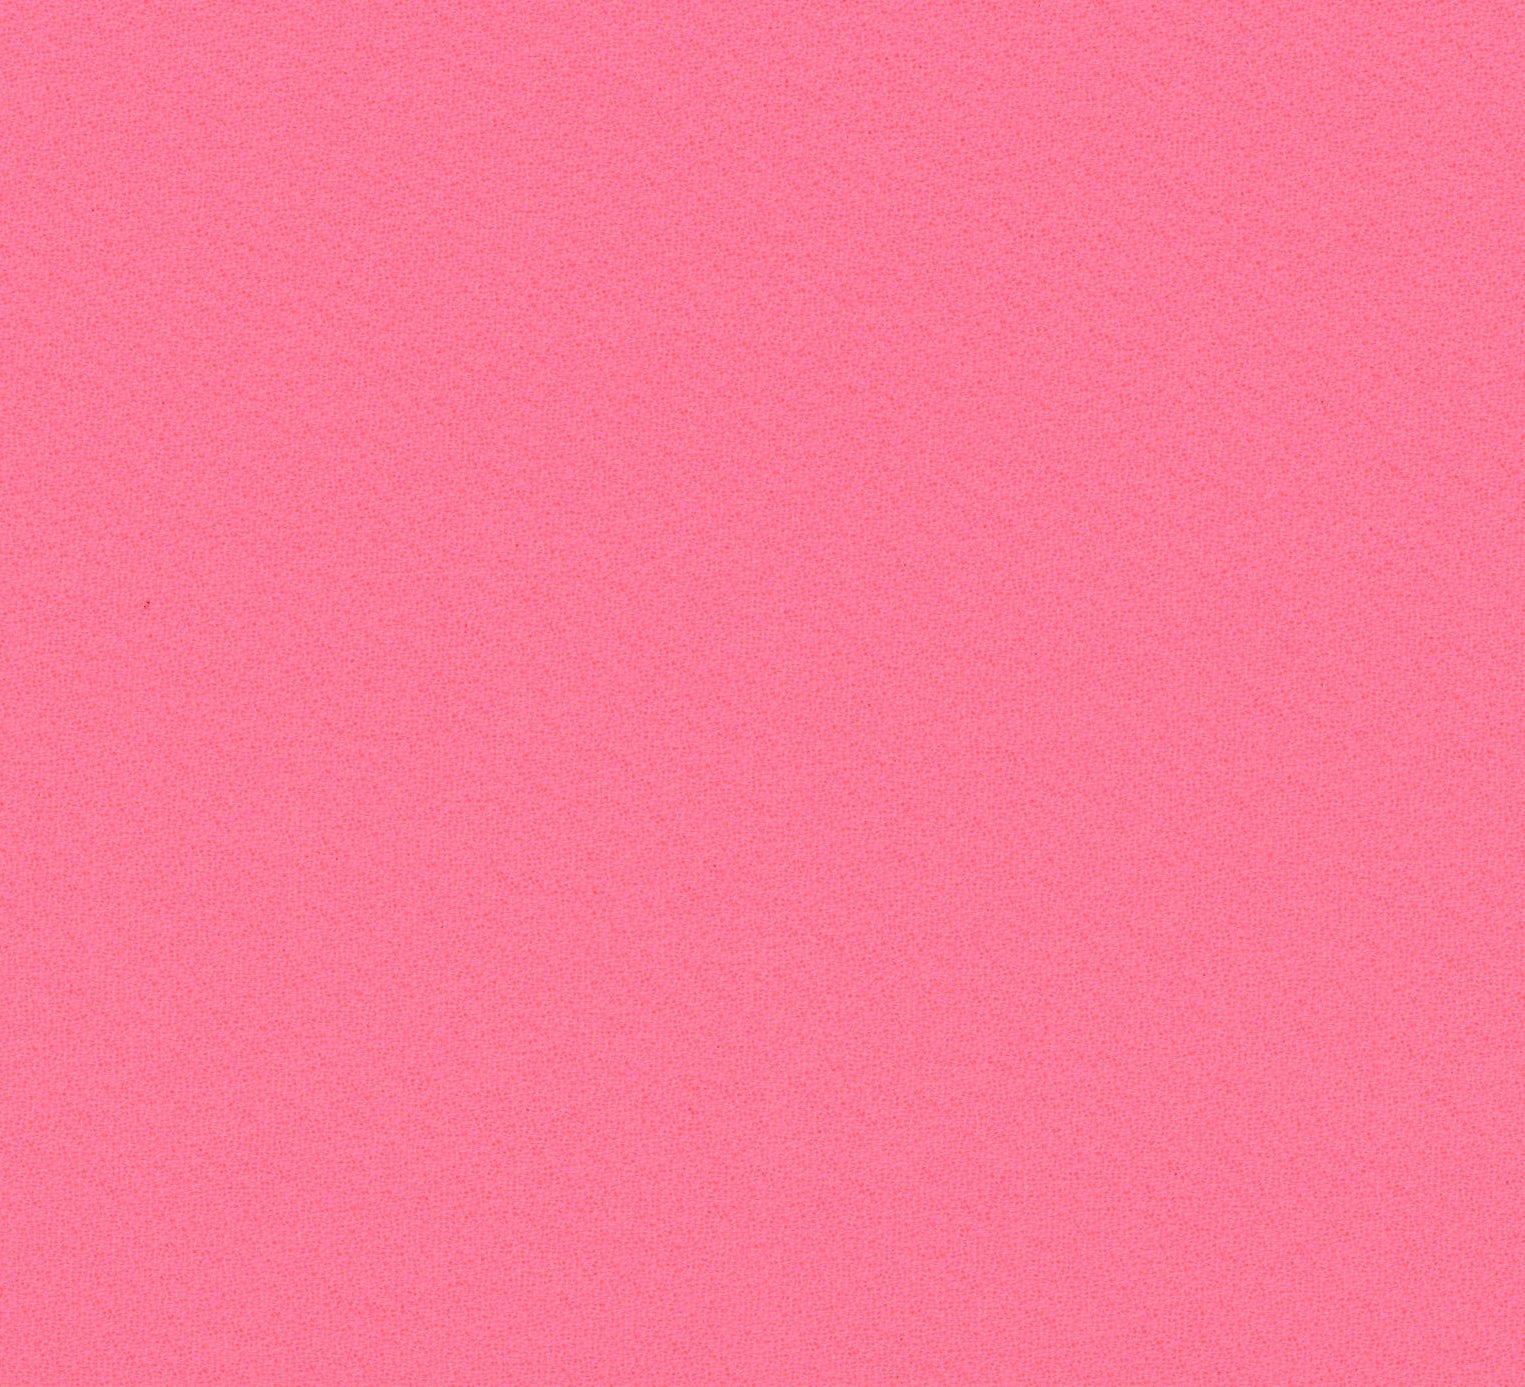 35005-03 Pink Polyester Plain Dyed 280g/yd 54" pink plain dyed polyester woven Solid Color - knit fabric - woven fabric - fabric company - fabric wholesale - fabric b2b - fabric factory - high quality fabric - hong kong fabric - fabric hk - acetate fabric - cotton fabric - linen fabric - metallic fabric - nylon fabric - polyester fabric - spandex fabric - chun wing hing - cwh hk - fabric worldwide ship - 針織布 - 梳織布 - 布料公司- 布料批發 - 香港布料 - 秦榮興